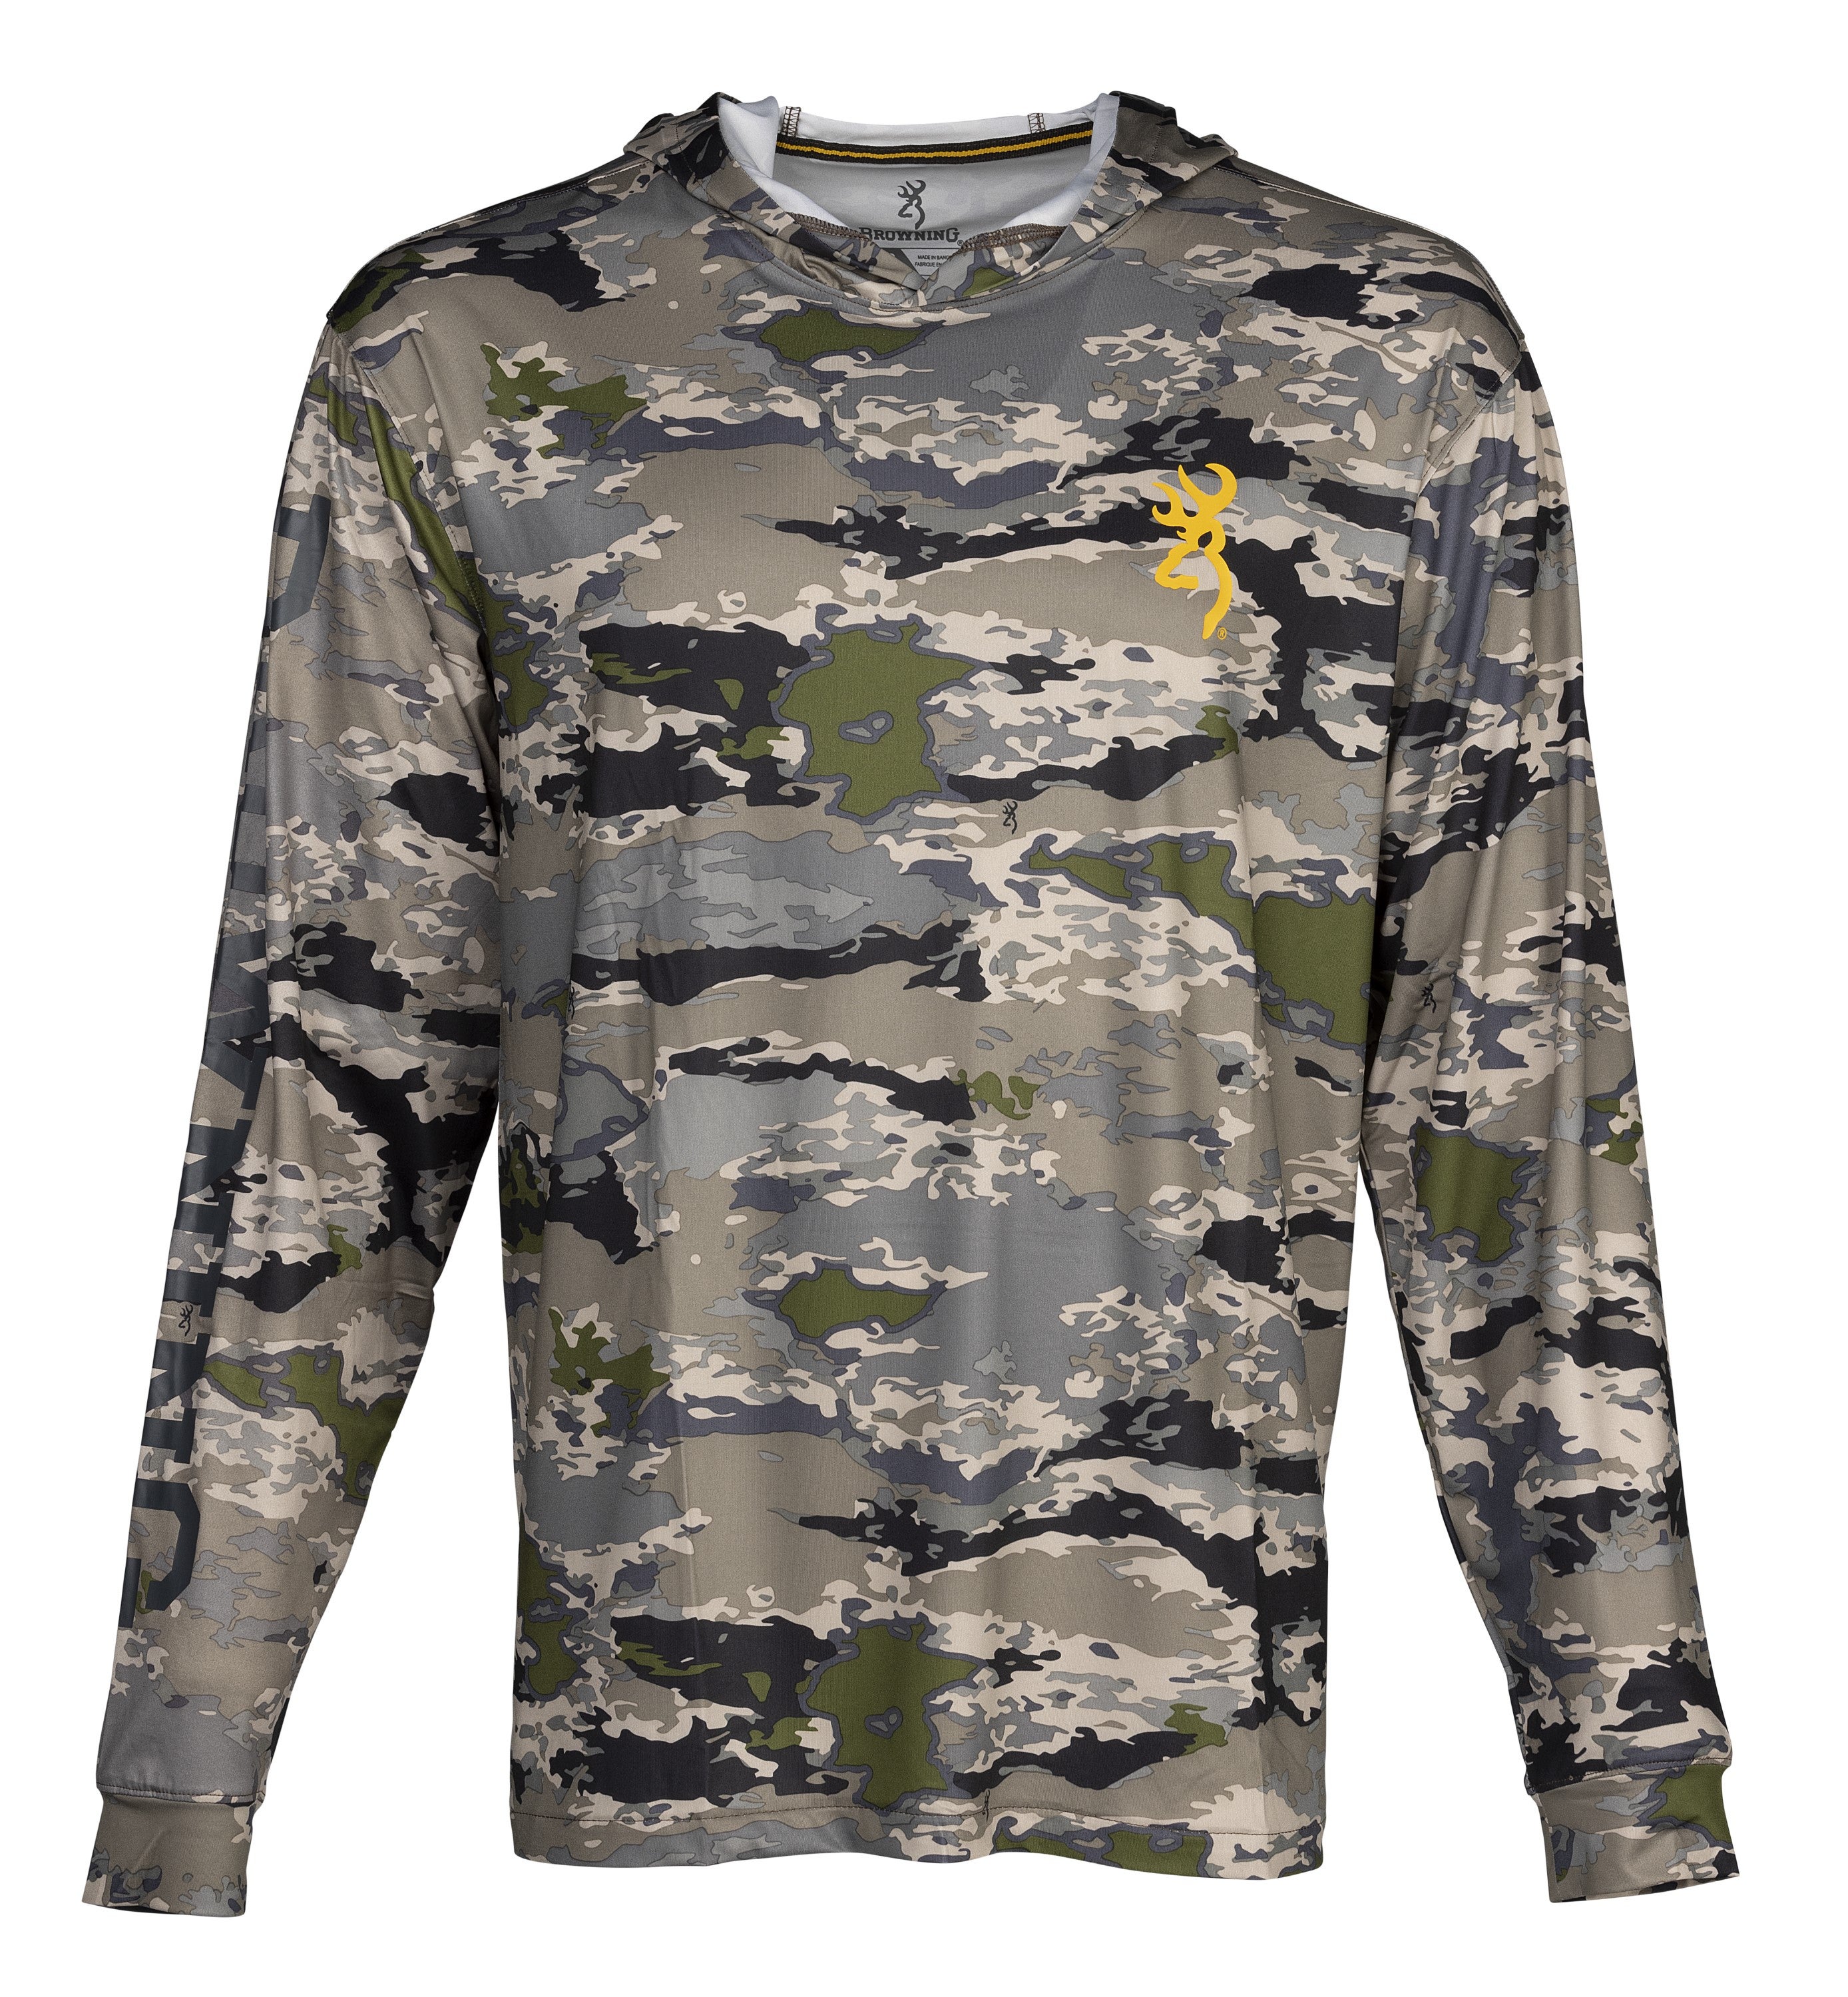 https://www.browning.com/content/dam/browning/product/clothing/2023/long-sleeve-sun-shirt-upf/Ovix-Long-Sleeve-Sun-Shirt-UPF-30108634-2.jpg